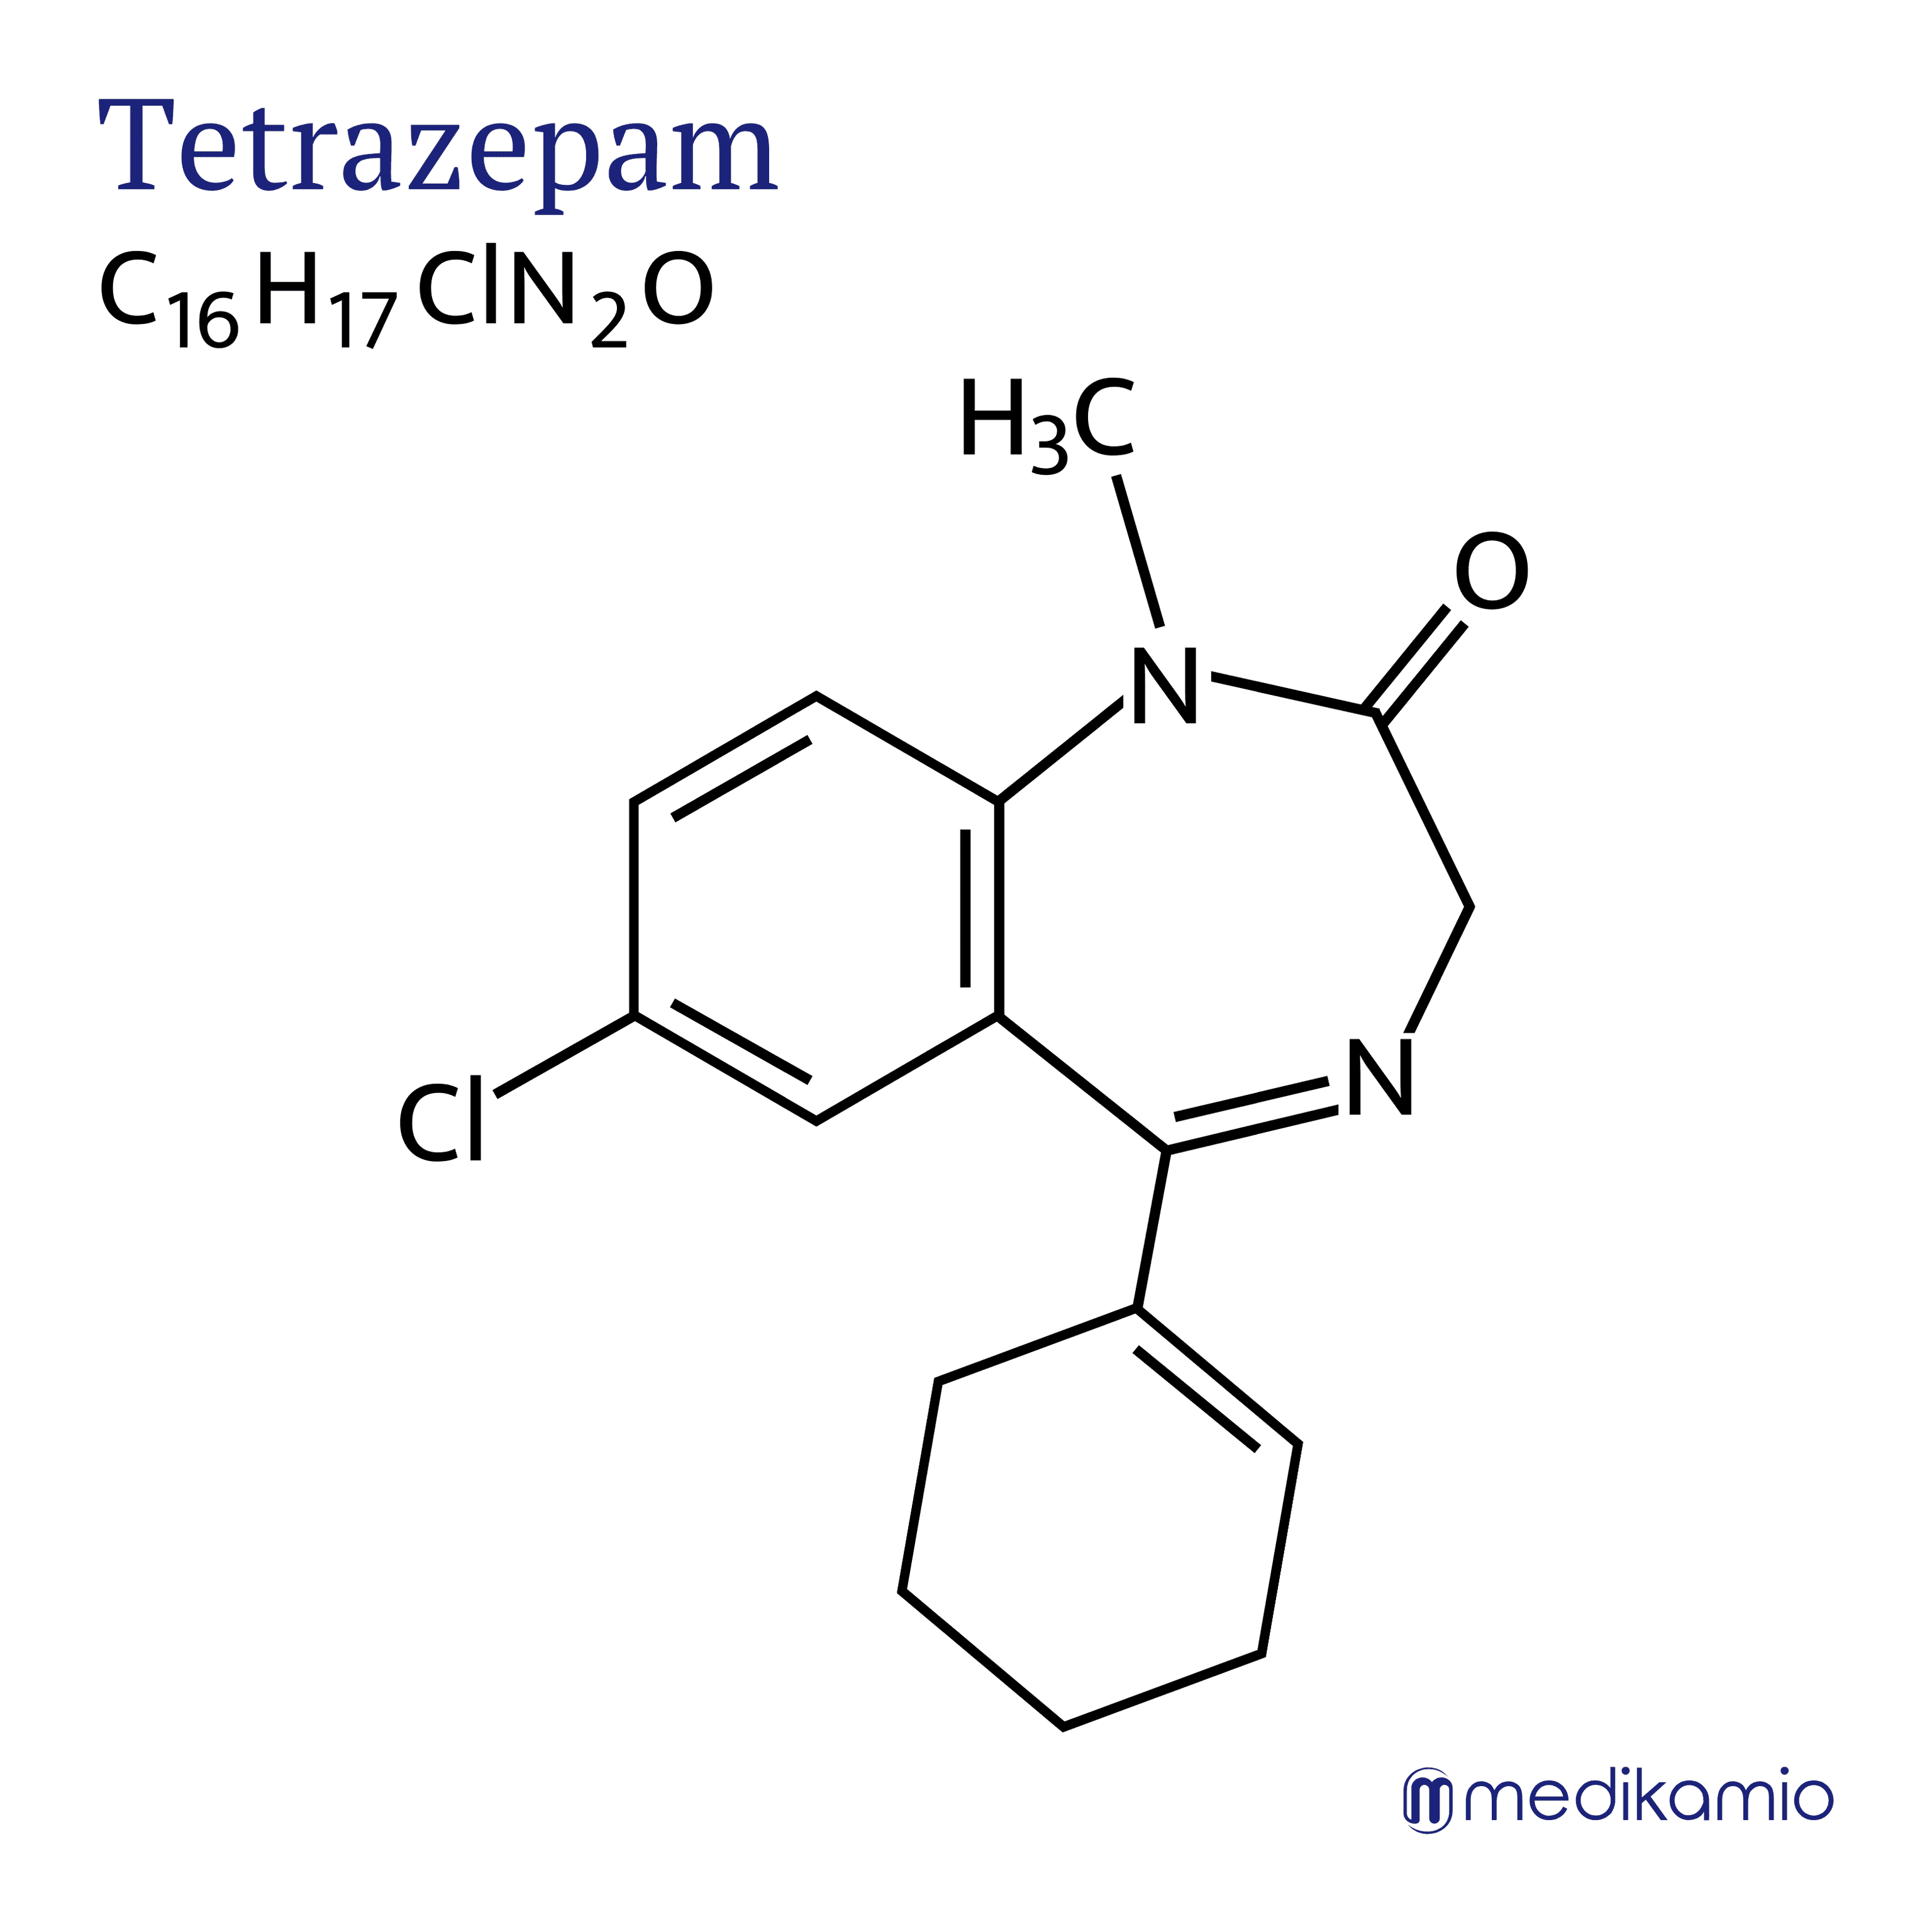 Graphic structural formula of the active substance tetrazepam